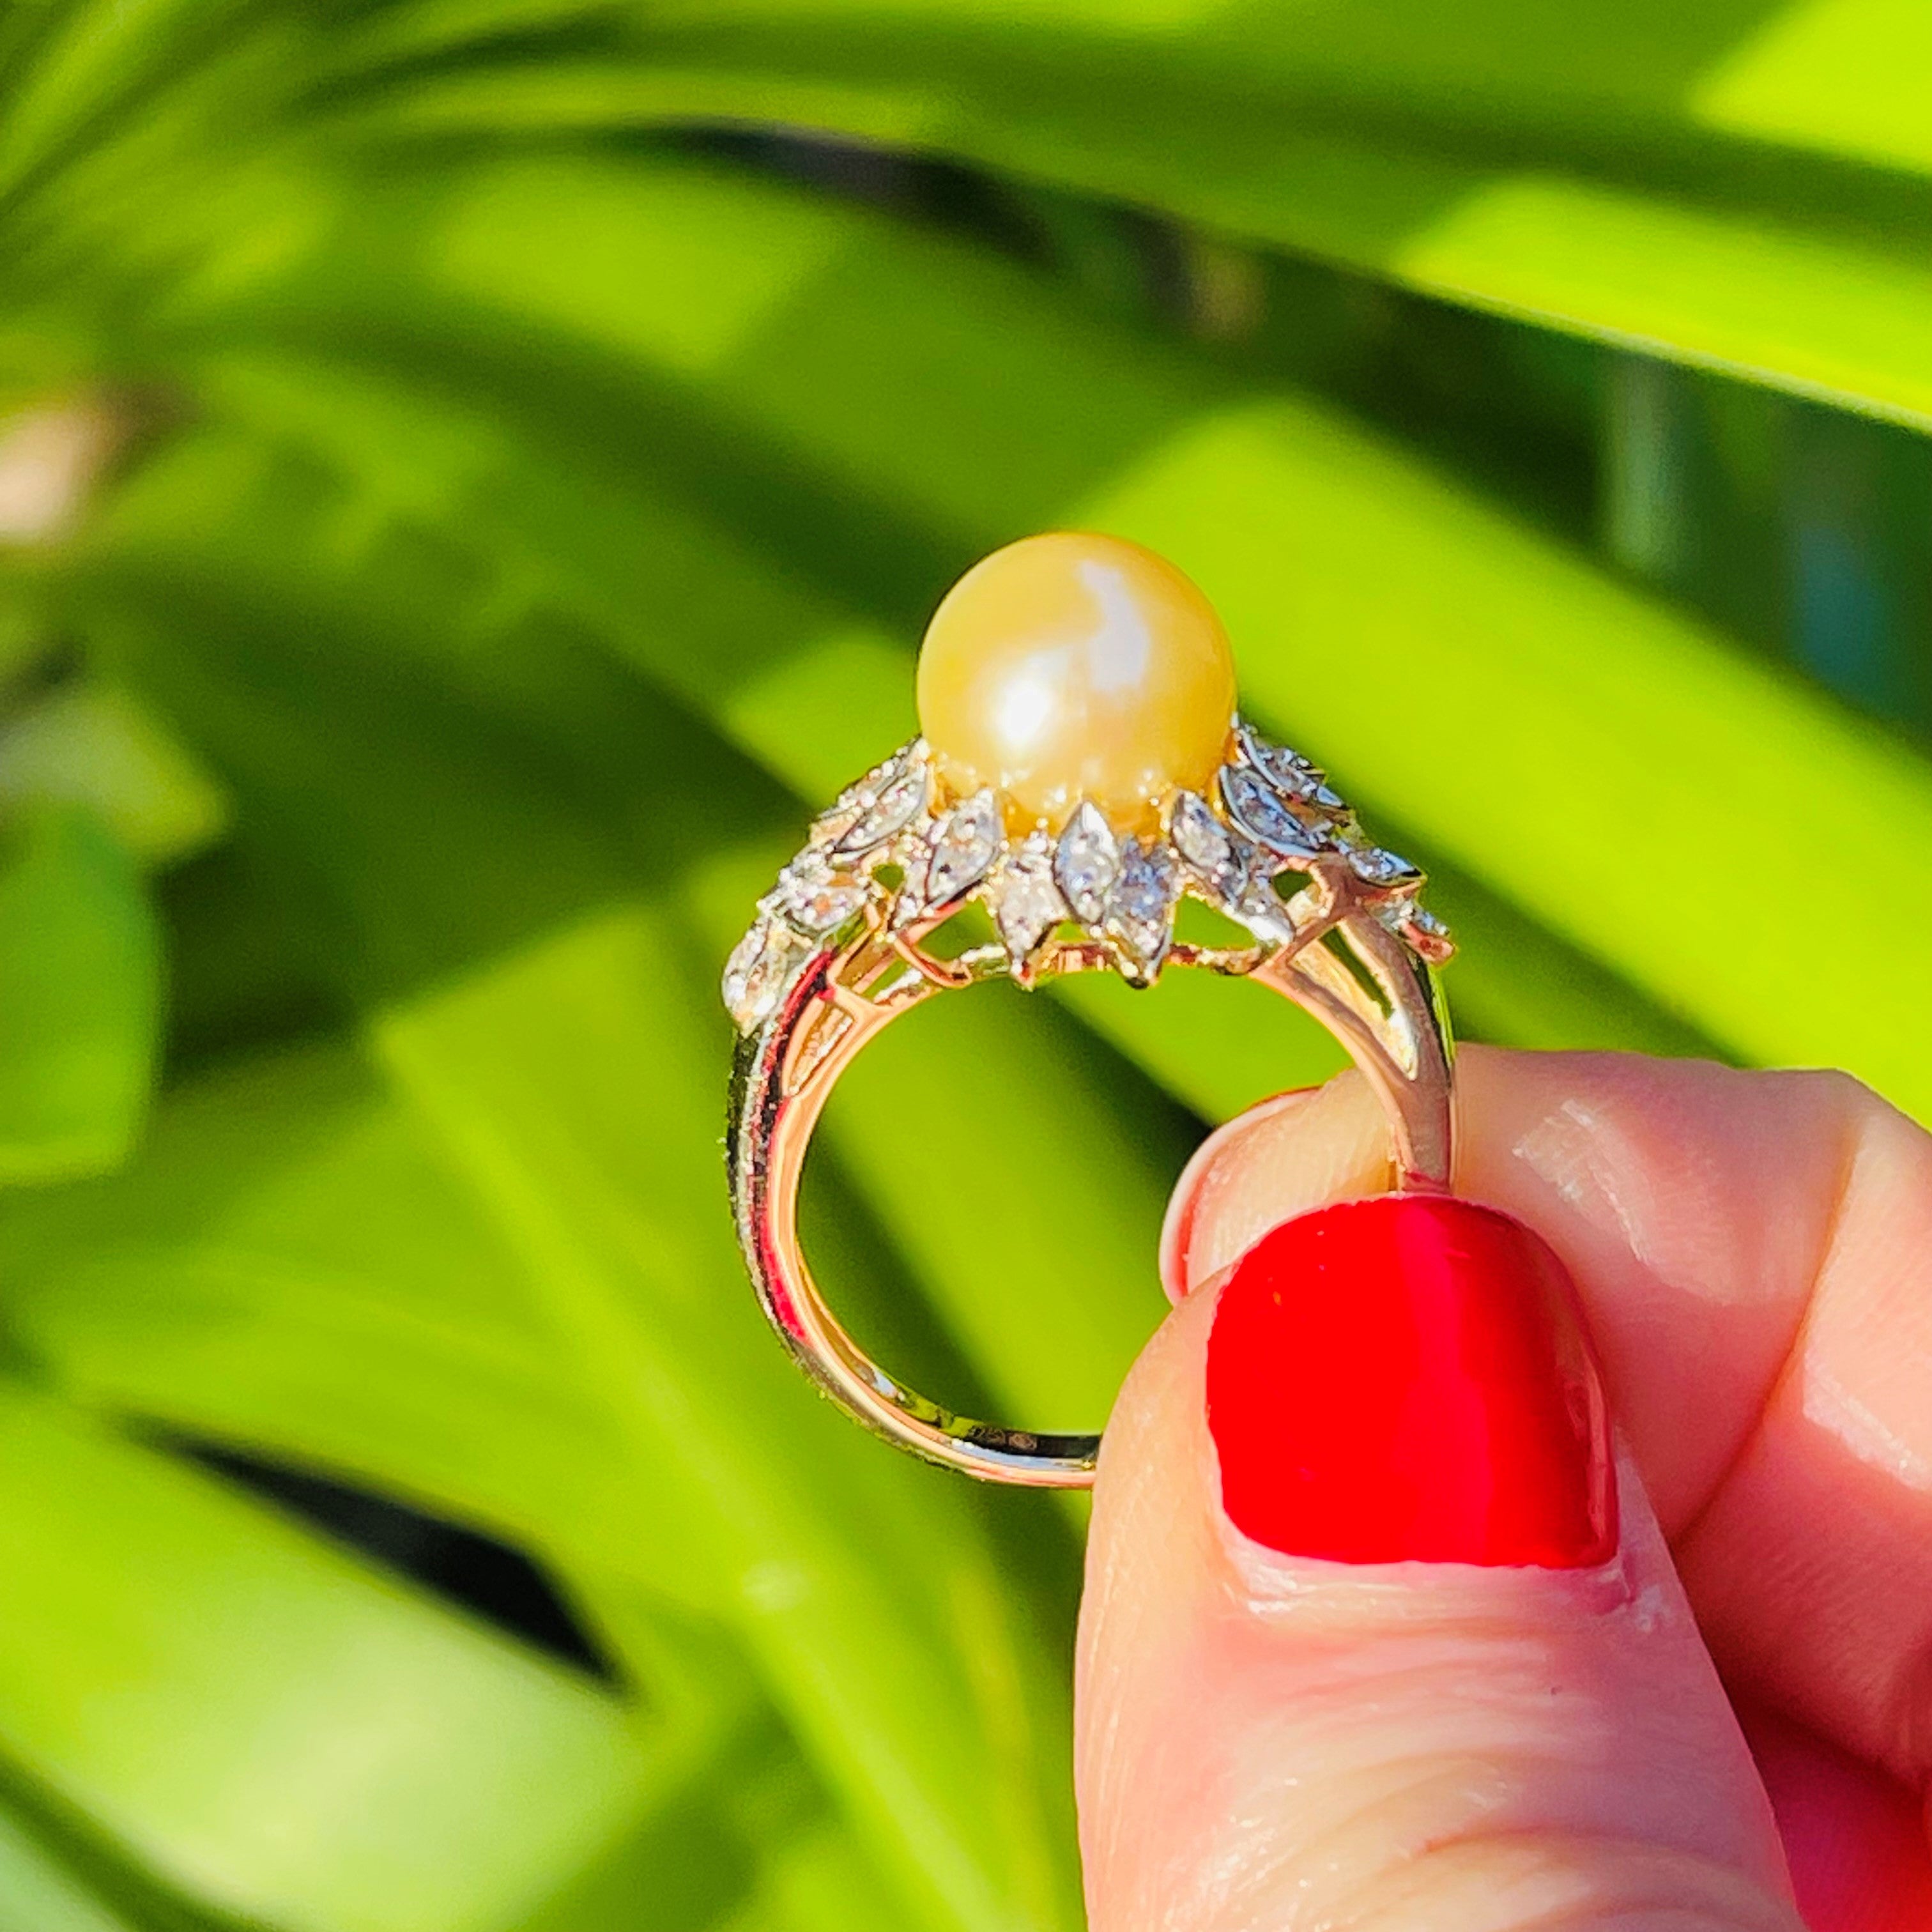 Diamond and Pearl Dress Ring